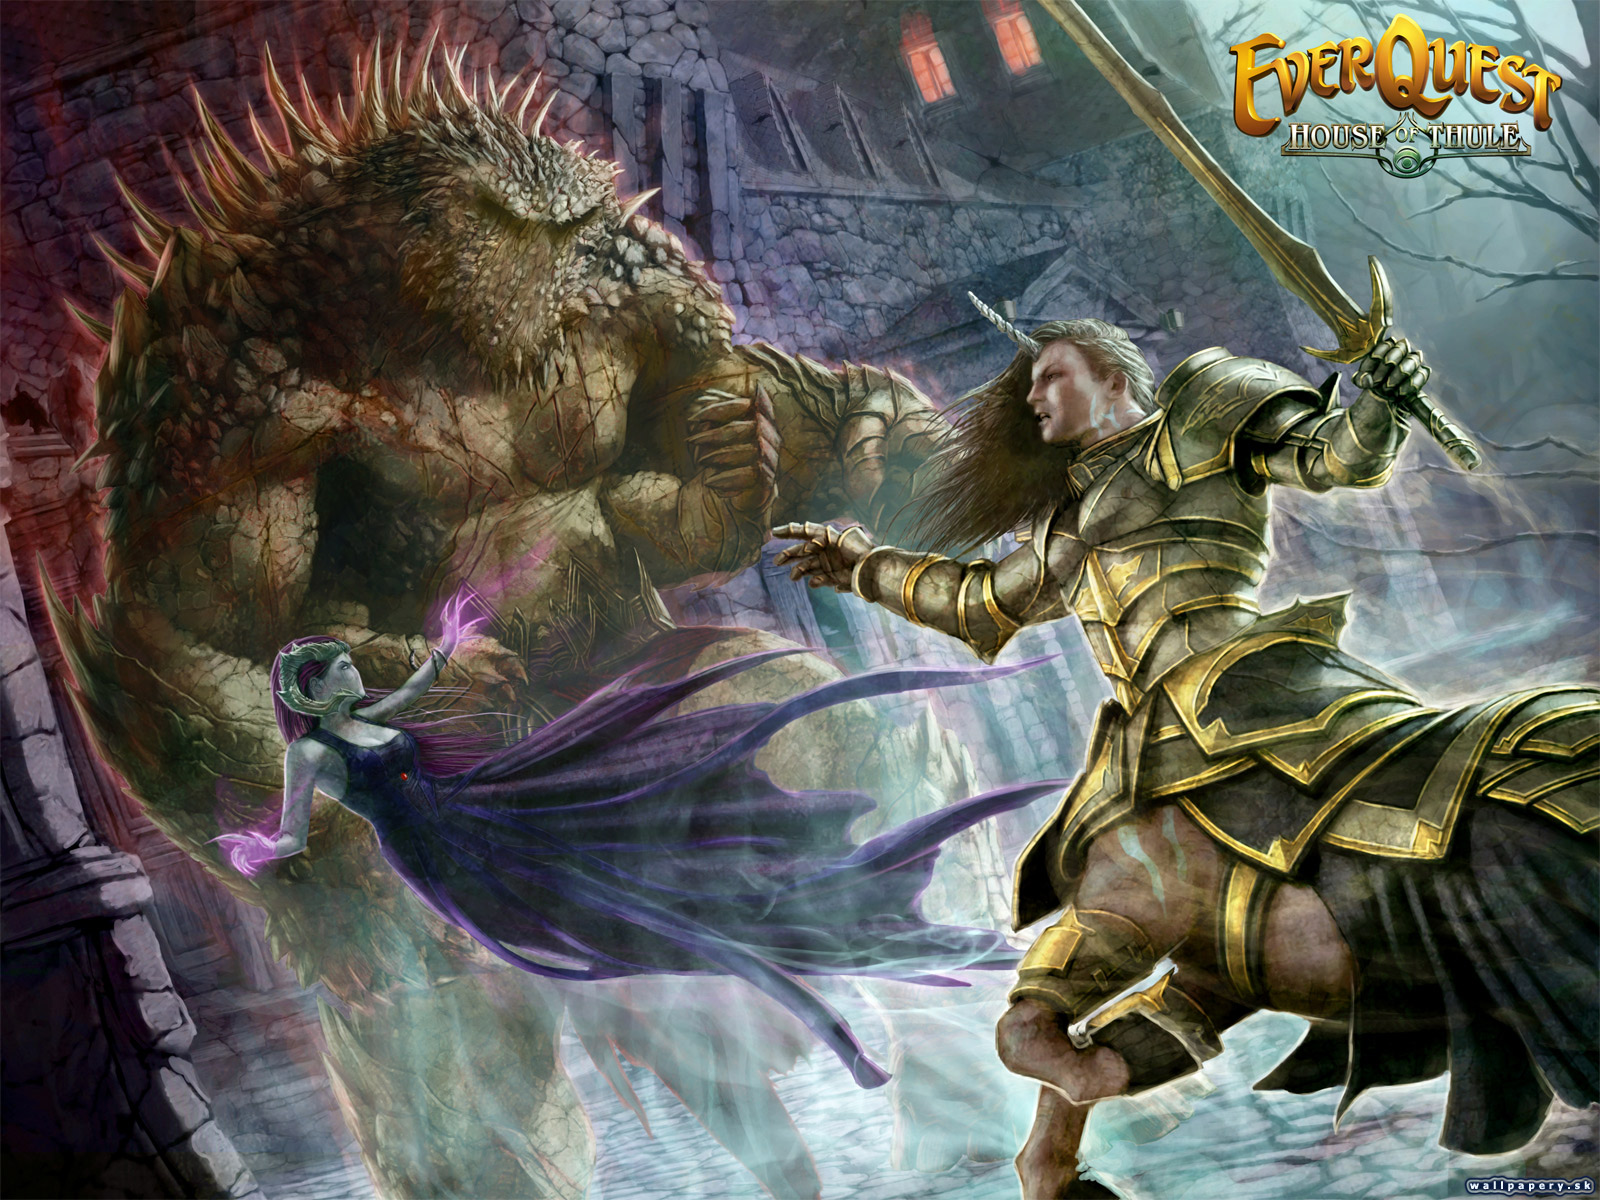 EverQuest: House of Thule - wallpaper 1